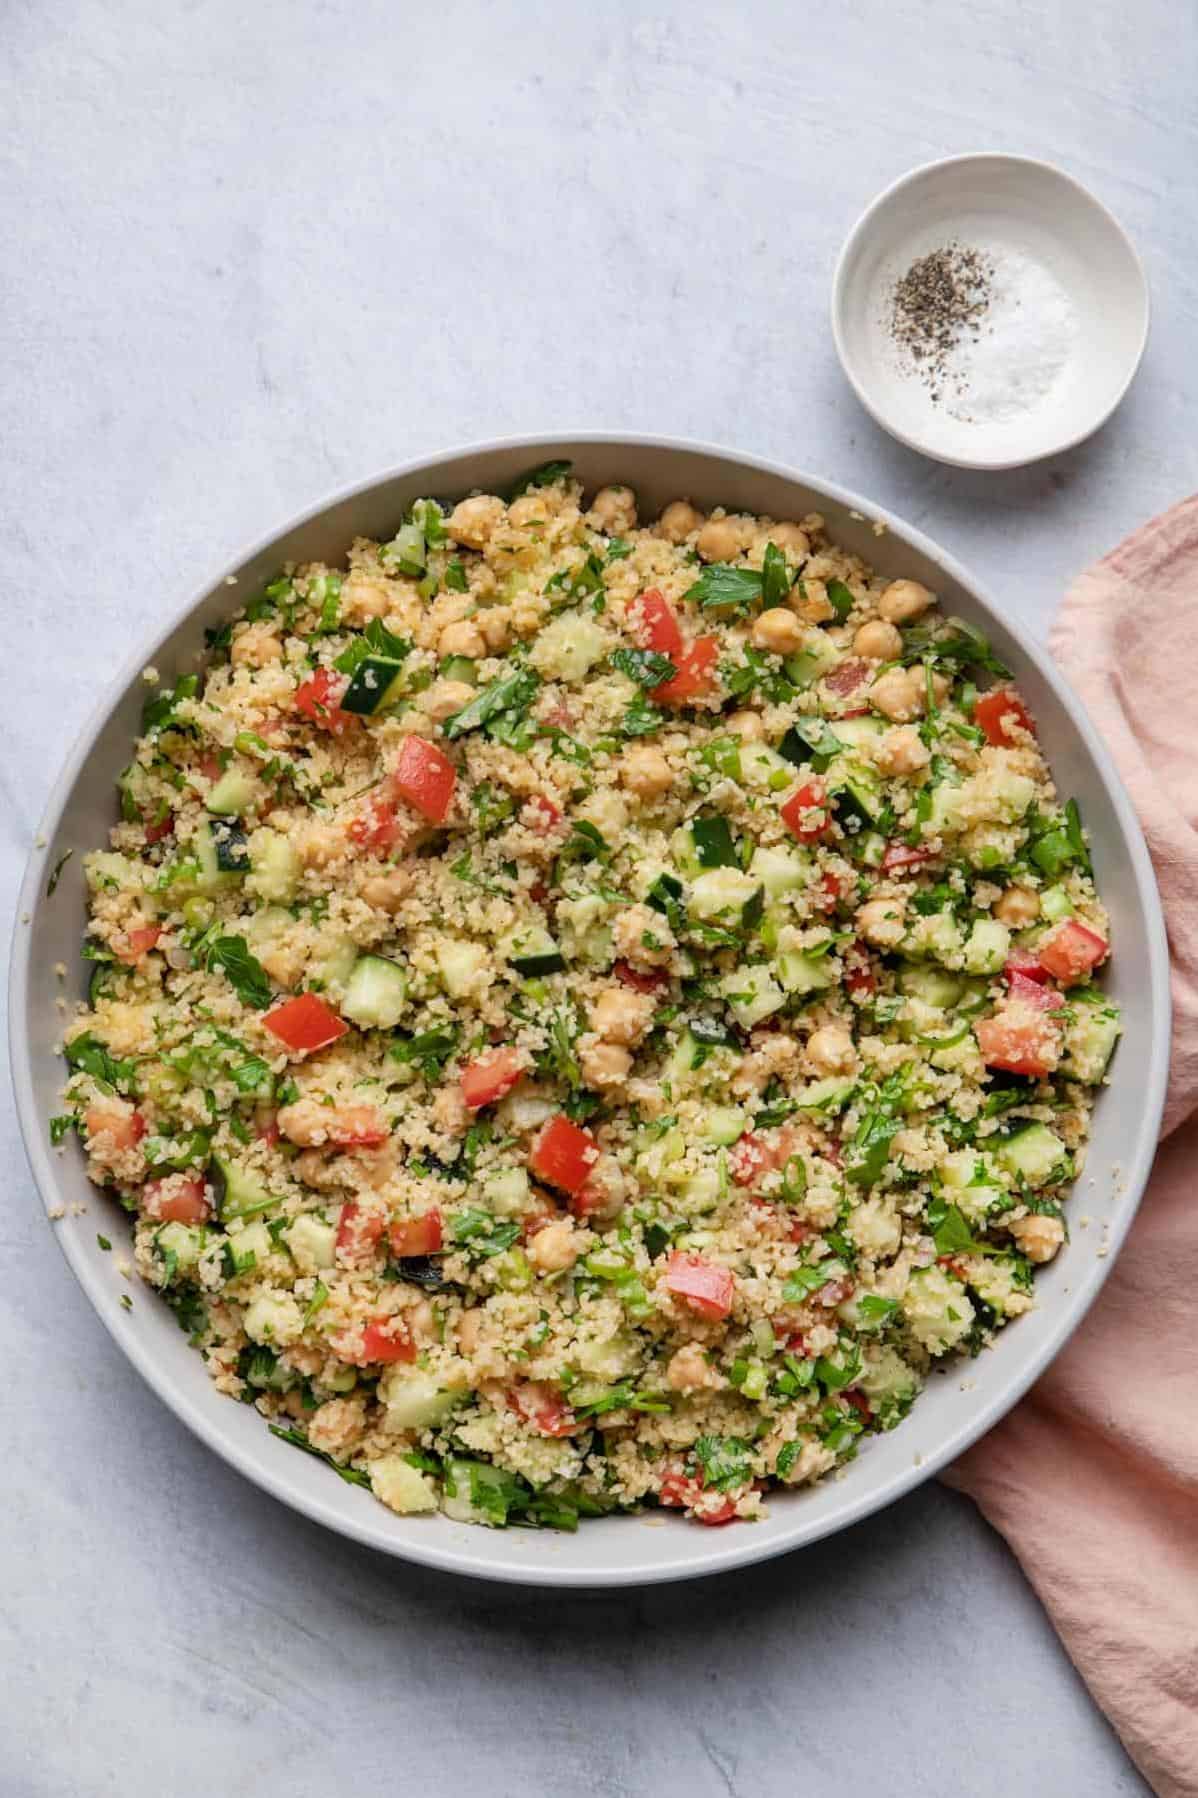  Get your daily dose of veggies with this colorful bulgur salad.